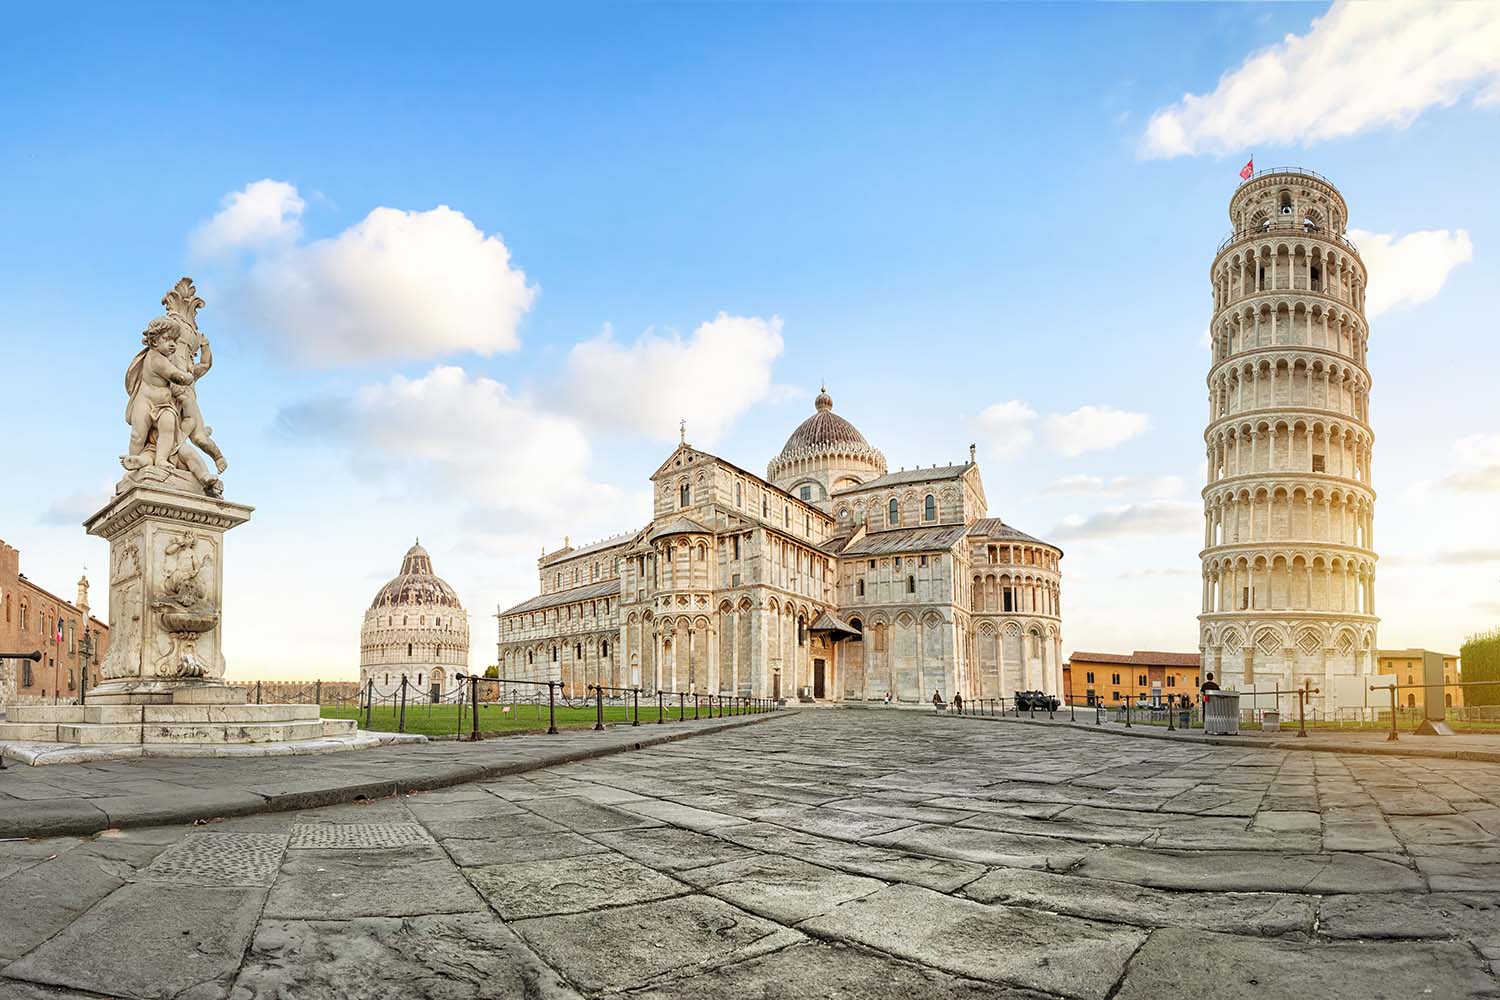 Panoramic low angle view of Piazza del Duomo square with Leaning Tower, Pisa Cathedral and Putti Fountain